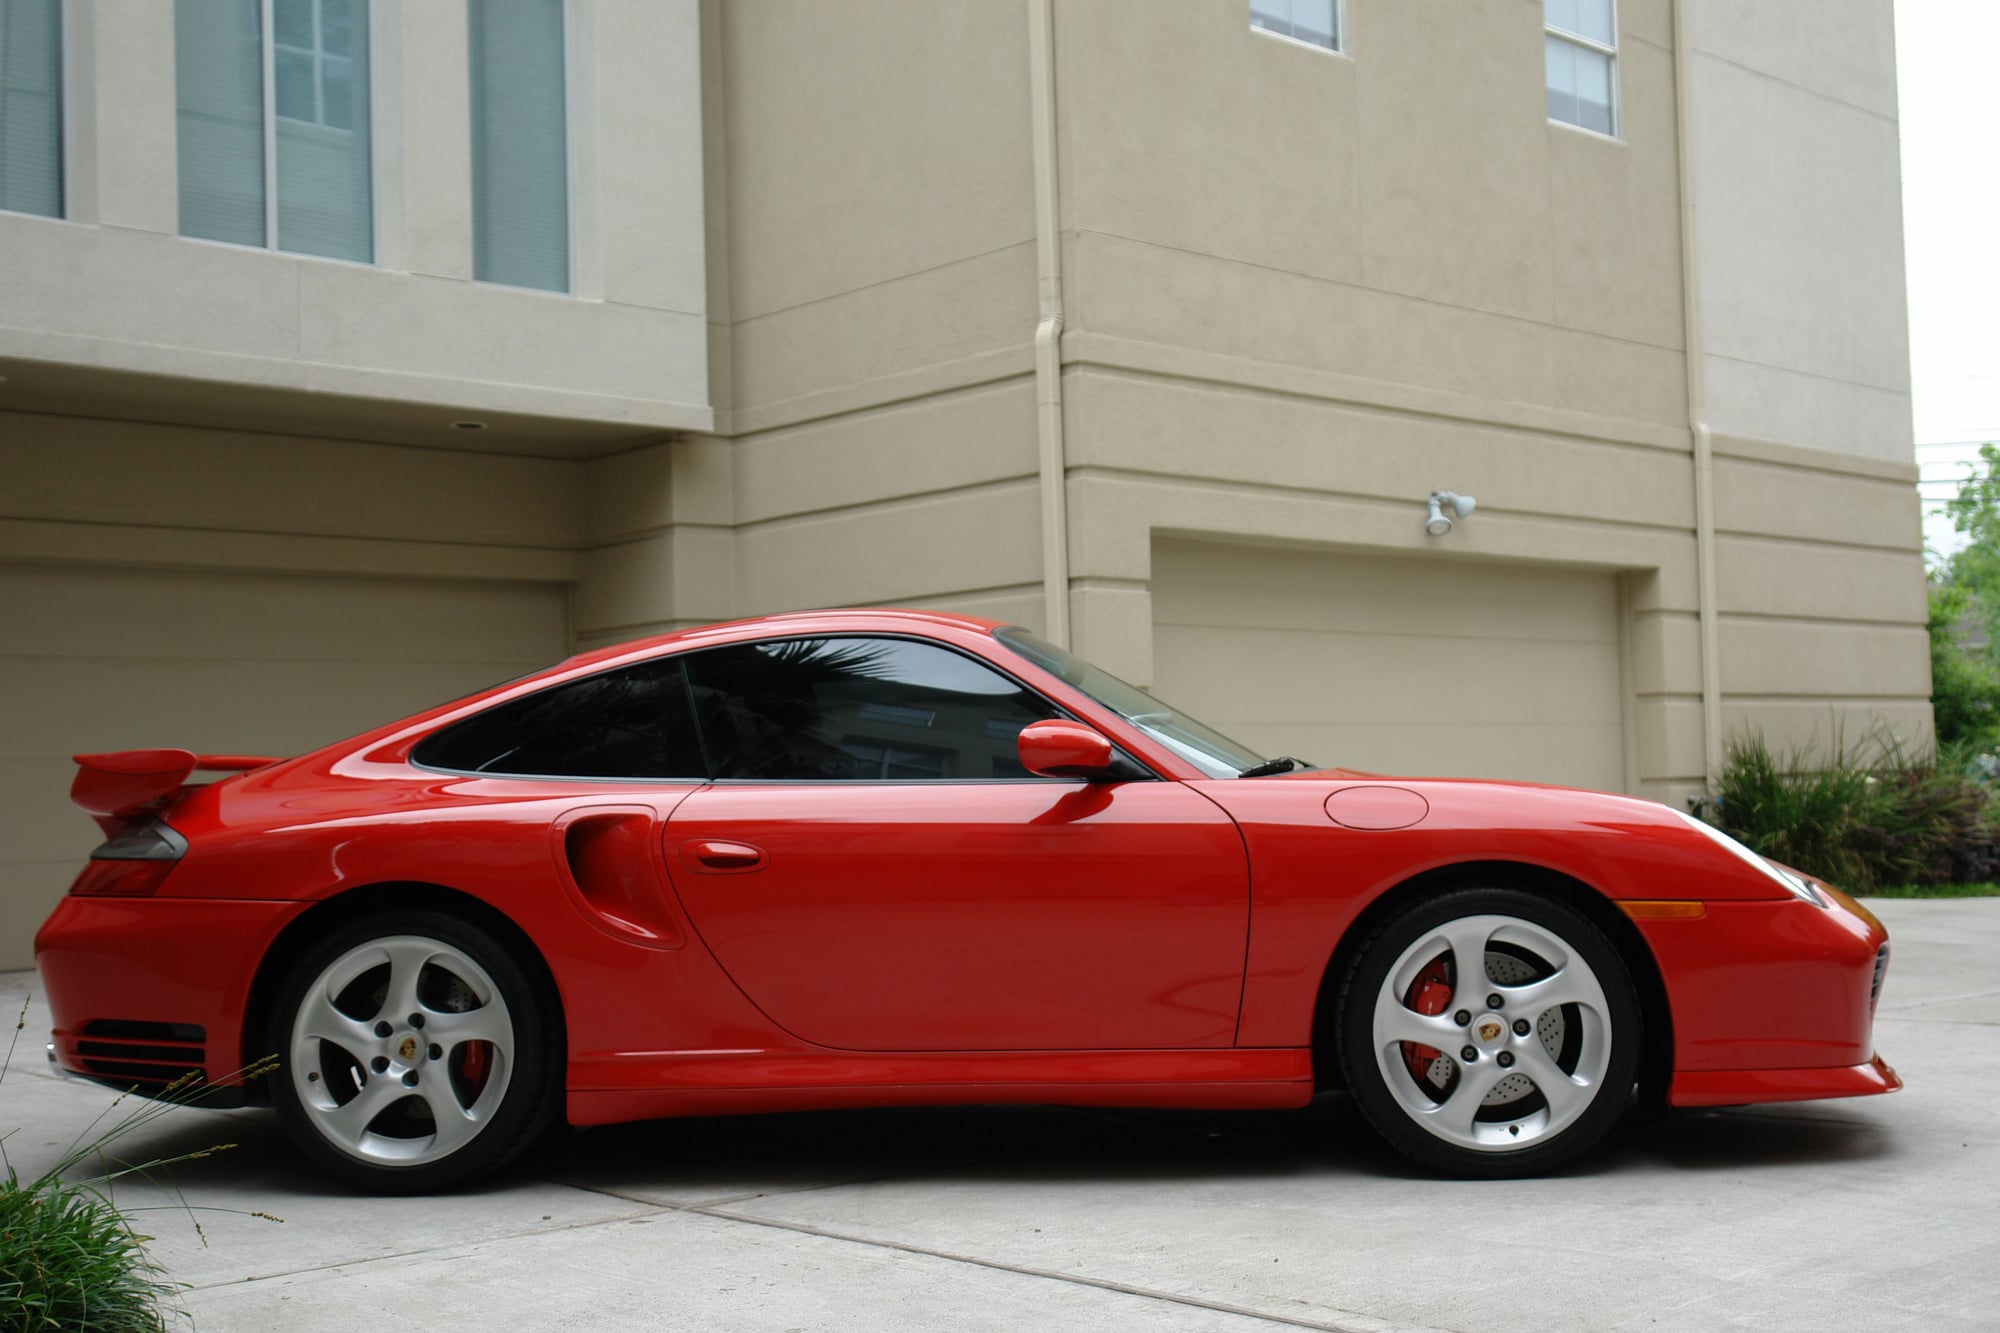 2003 Porsche 911 - Reluctantly parting ways with my low mileage 2003 guards red 996 turbo X50. - Used - VIN WPOAB299135686456 - 26,314 Miles - 6 cyl - 4WD - Manual - Coupe - Red - Gretna, LA 70056, United States